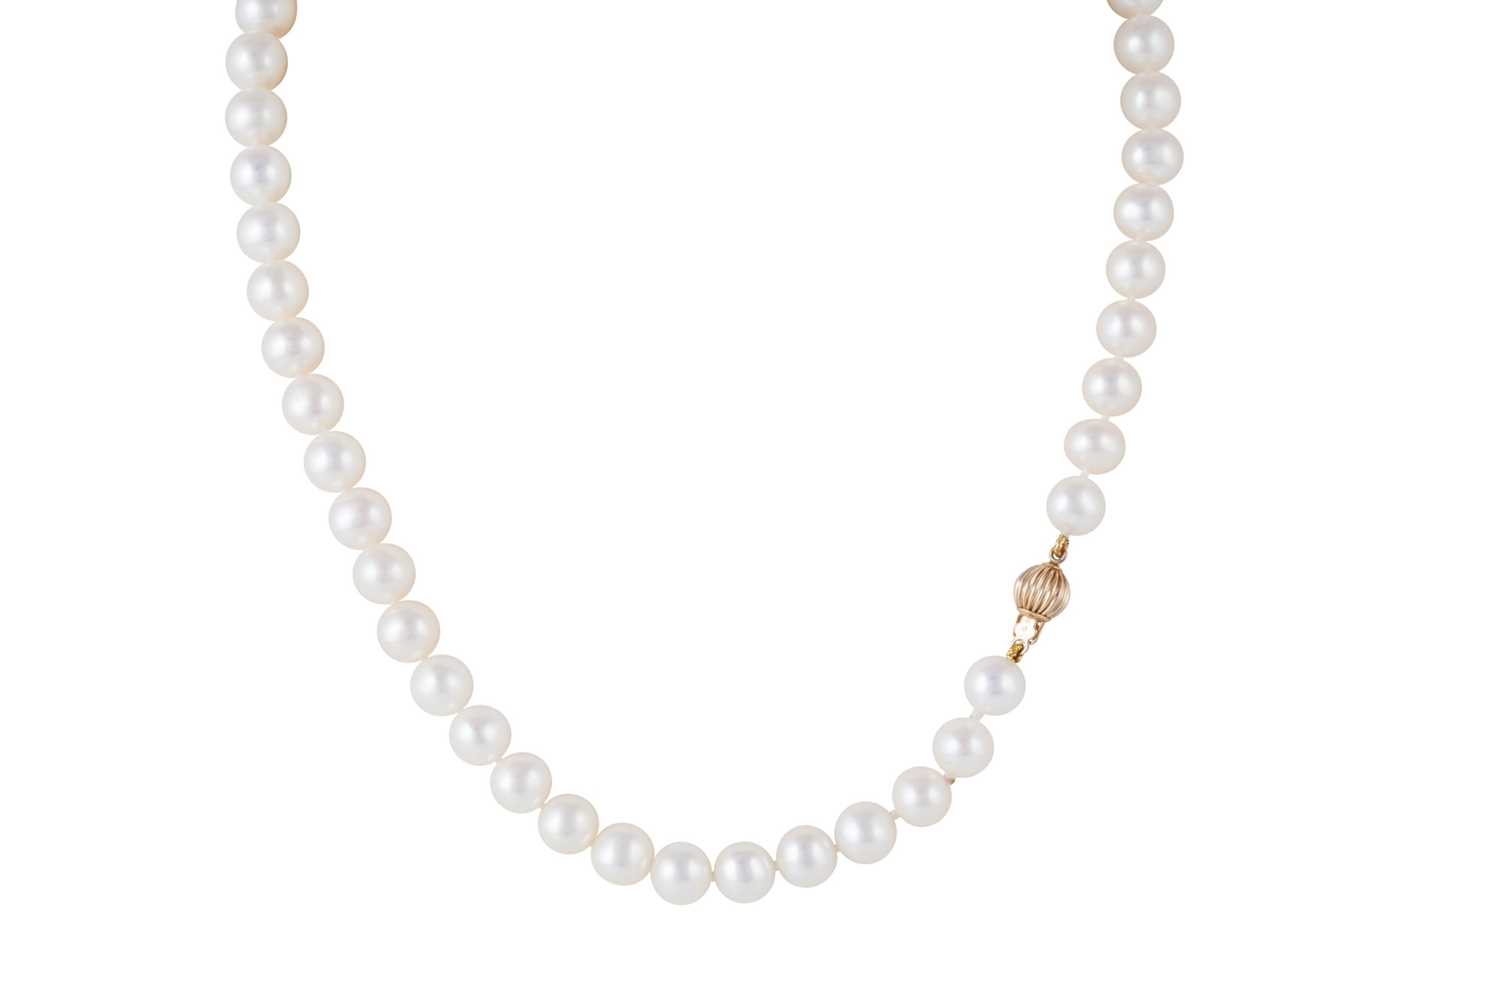 Lot 229 - A CULTURED PEARL NECKLACE, with 14ct gold clasp